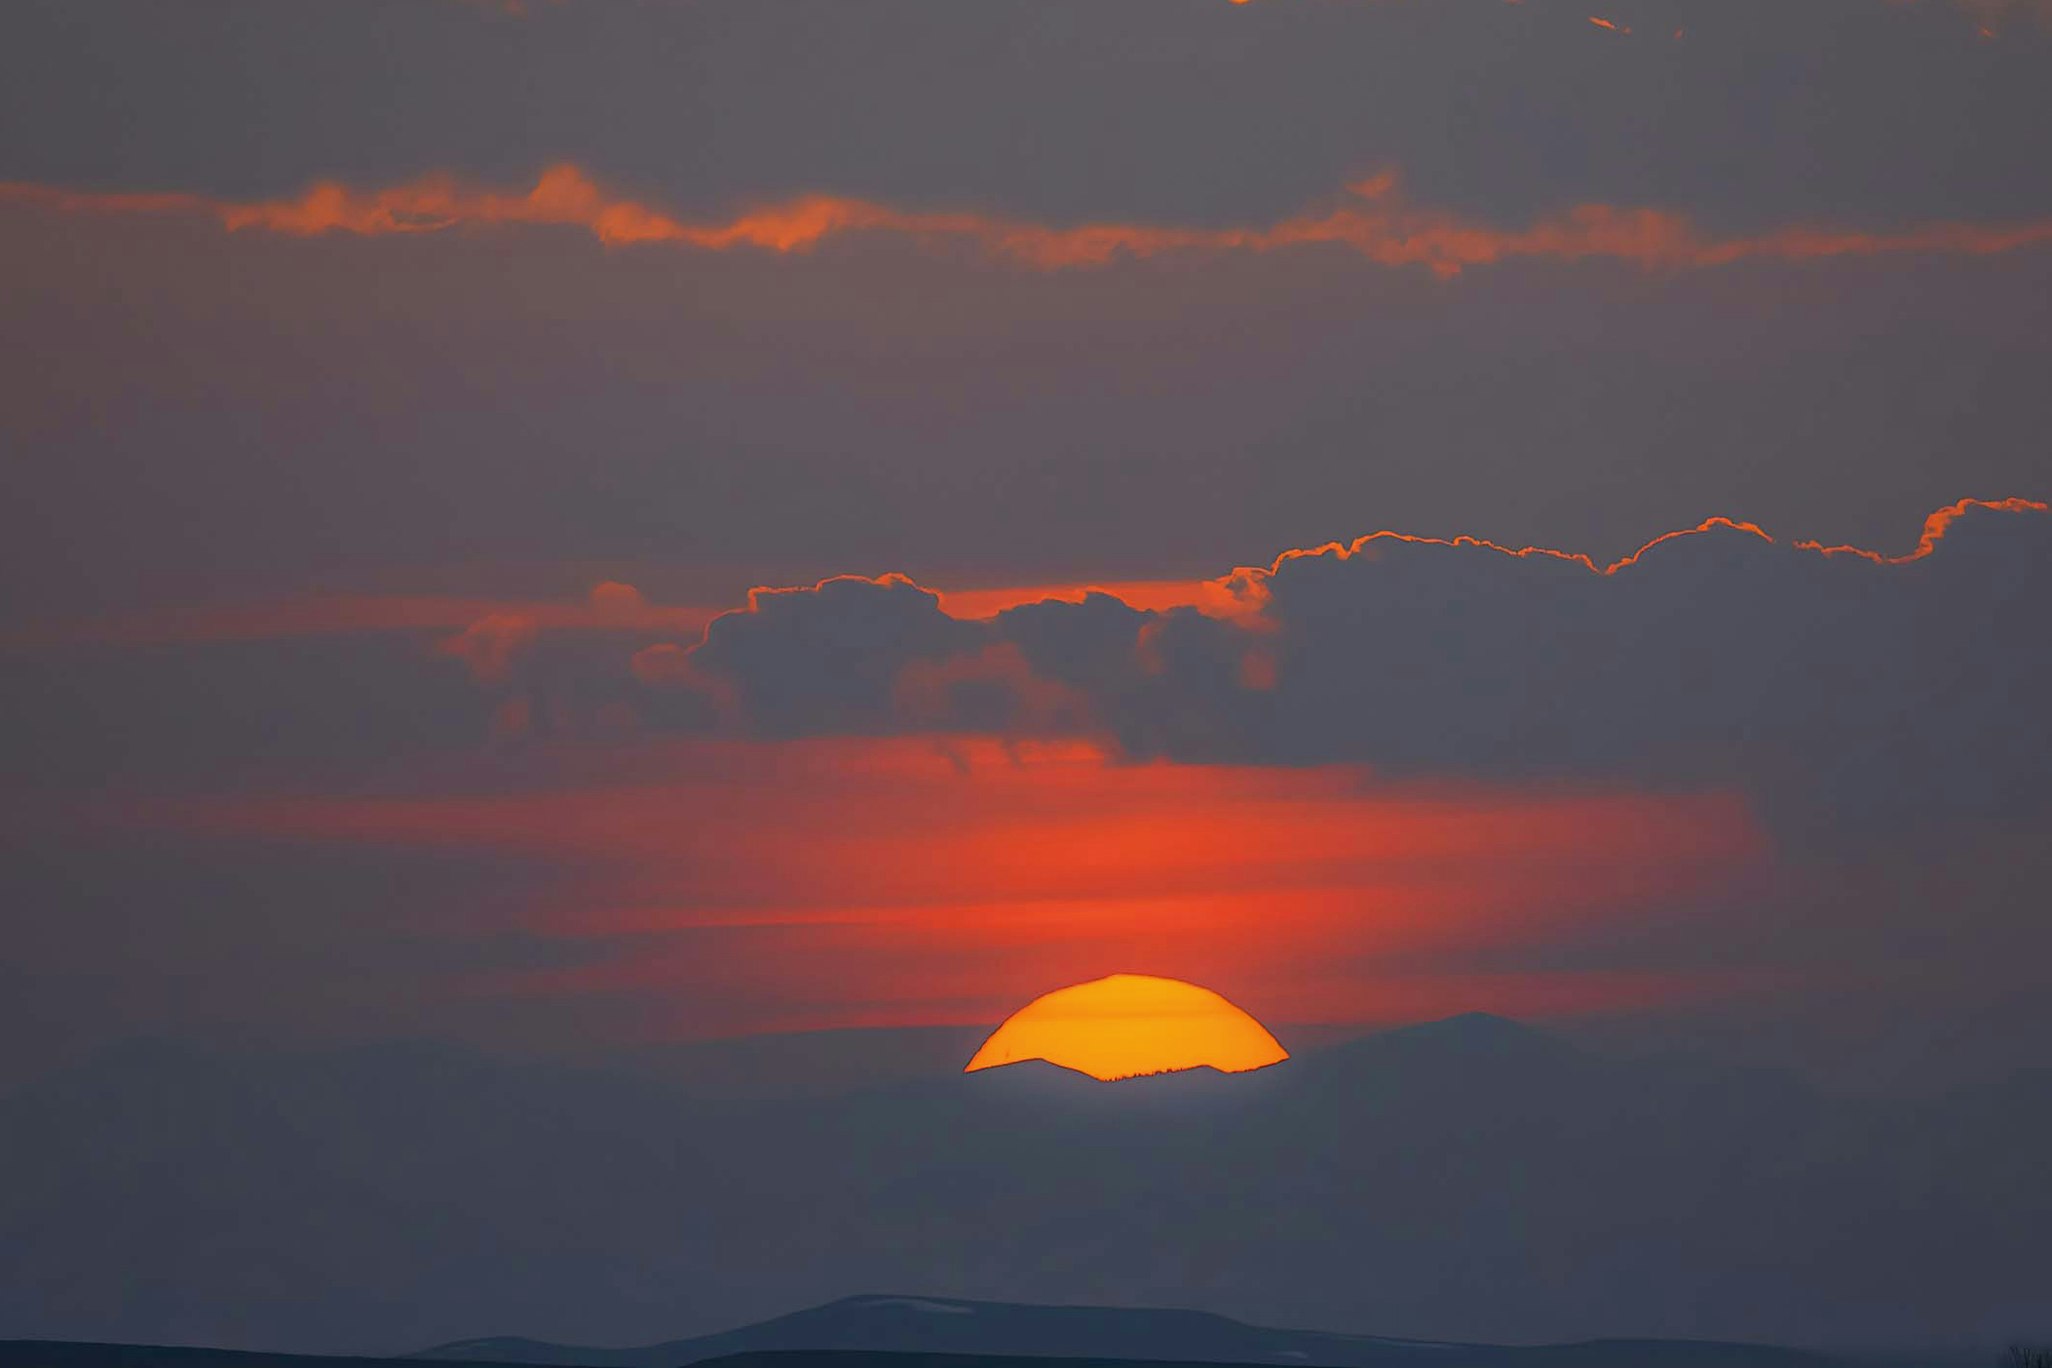 Sunset photo taken on Thursday, May 18, 2023, by Dave Bell in Pinedale, Wyoming